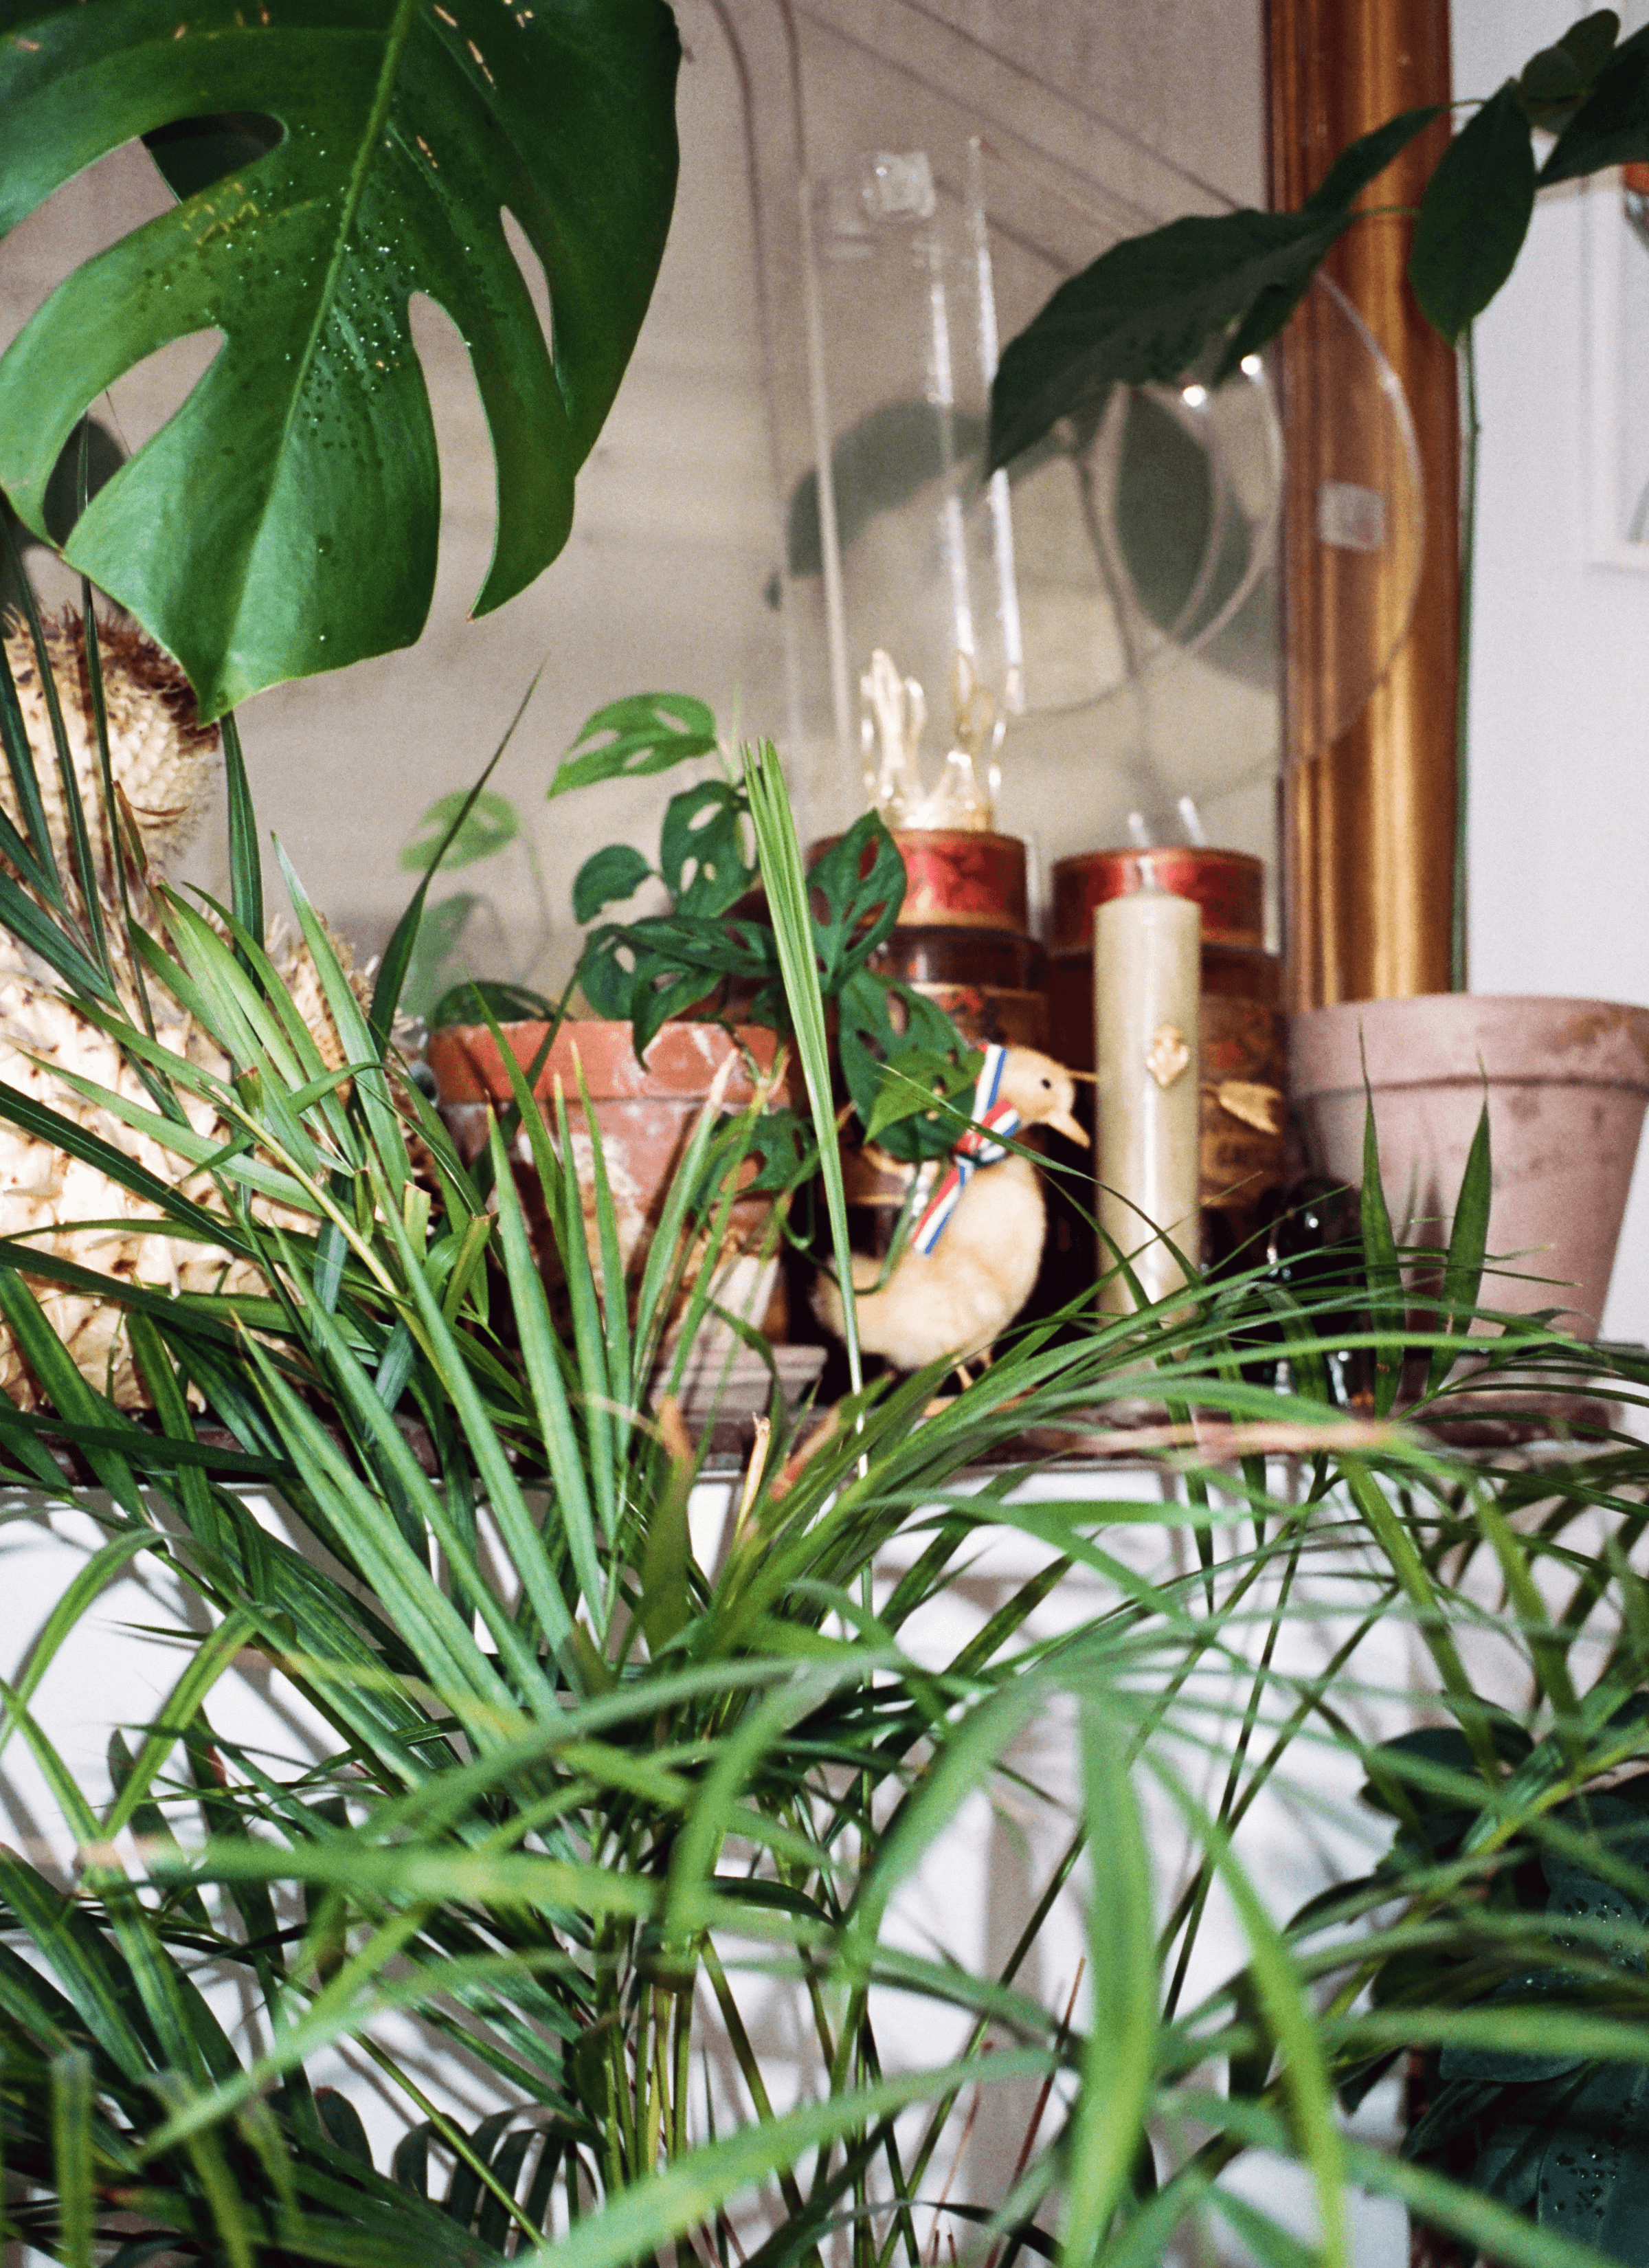 Areca palm leaves at the very front of the camera while there are other potted plants, empty pots, candles, and duck/chicken statues behind on the cupboard.